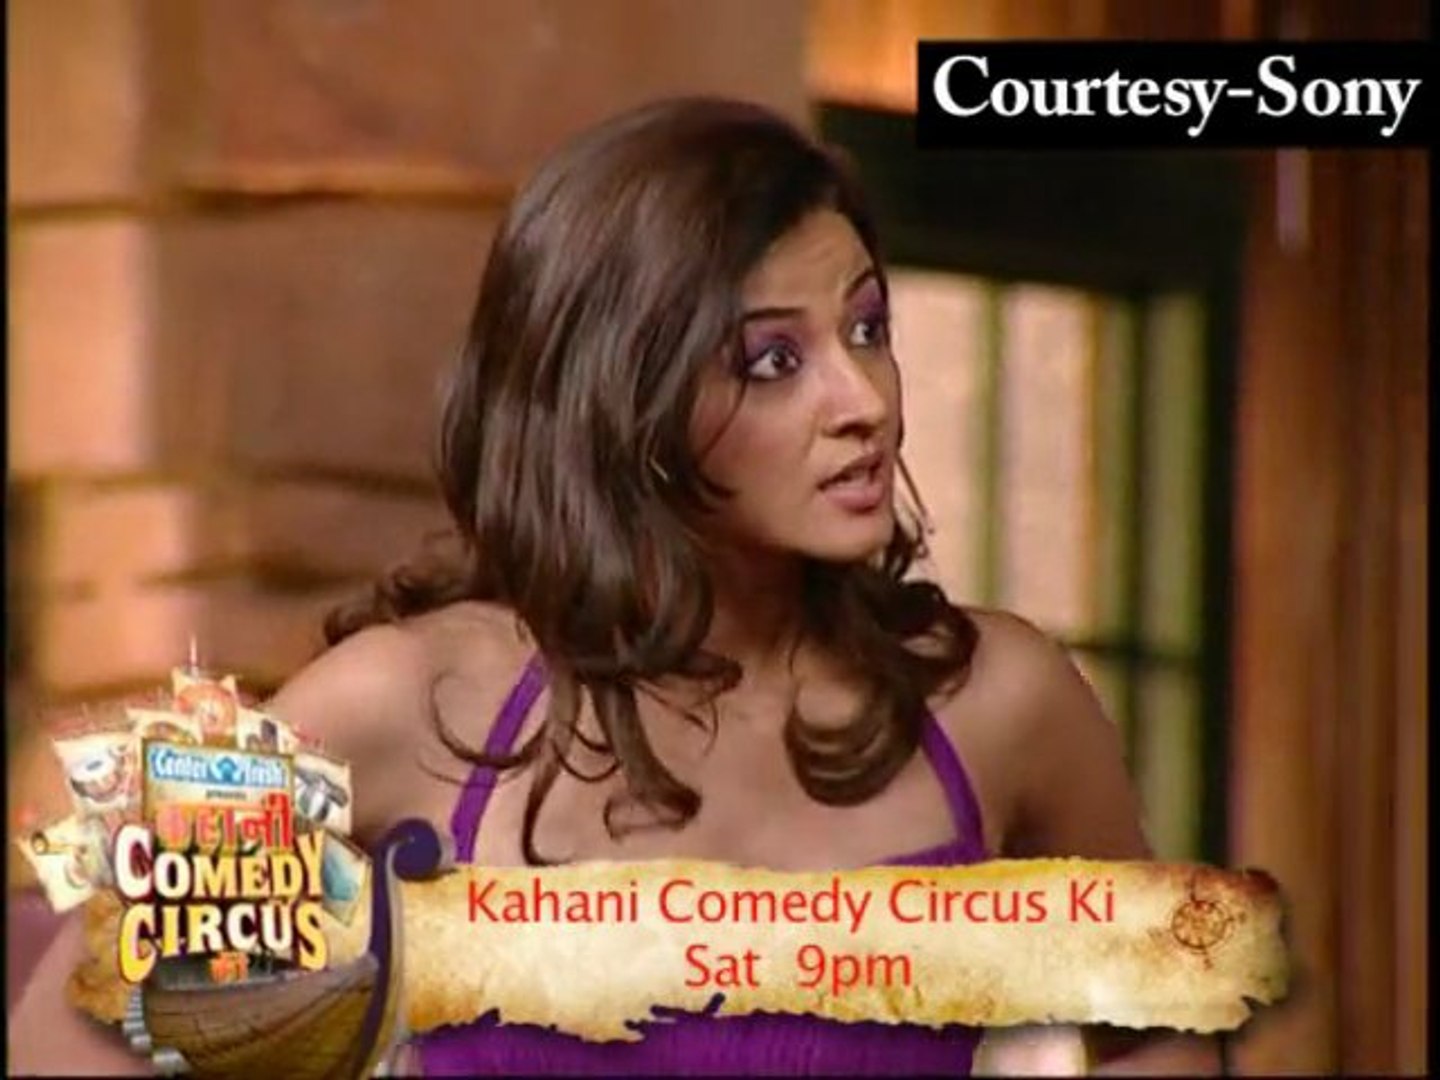 Comedy Circus Performances Tv Shows Part 2 Video Dailymotion After 4 years and 12 successful seasons, the veterans of comedy circus now pair up with fresh talent.this season sees a veteran paired with a celeb mentoring a team with a new talent and a celeb. comedy circus performances tv shows part 2